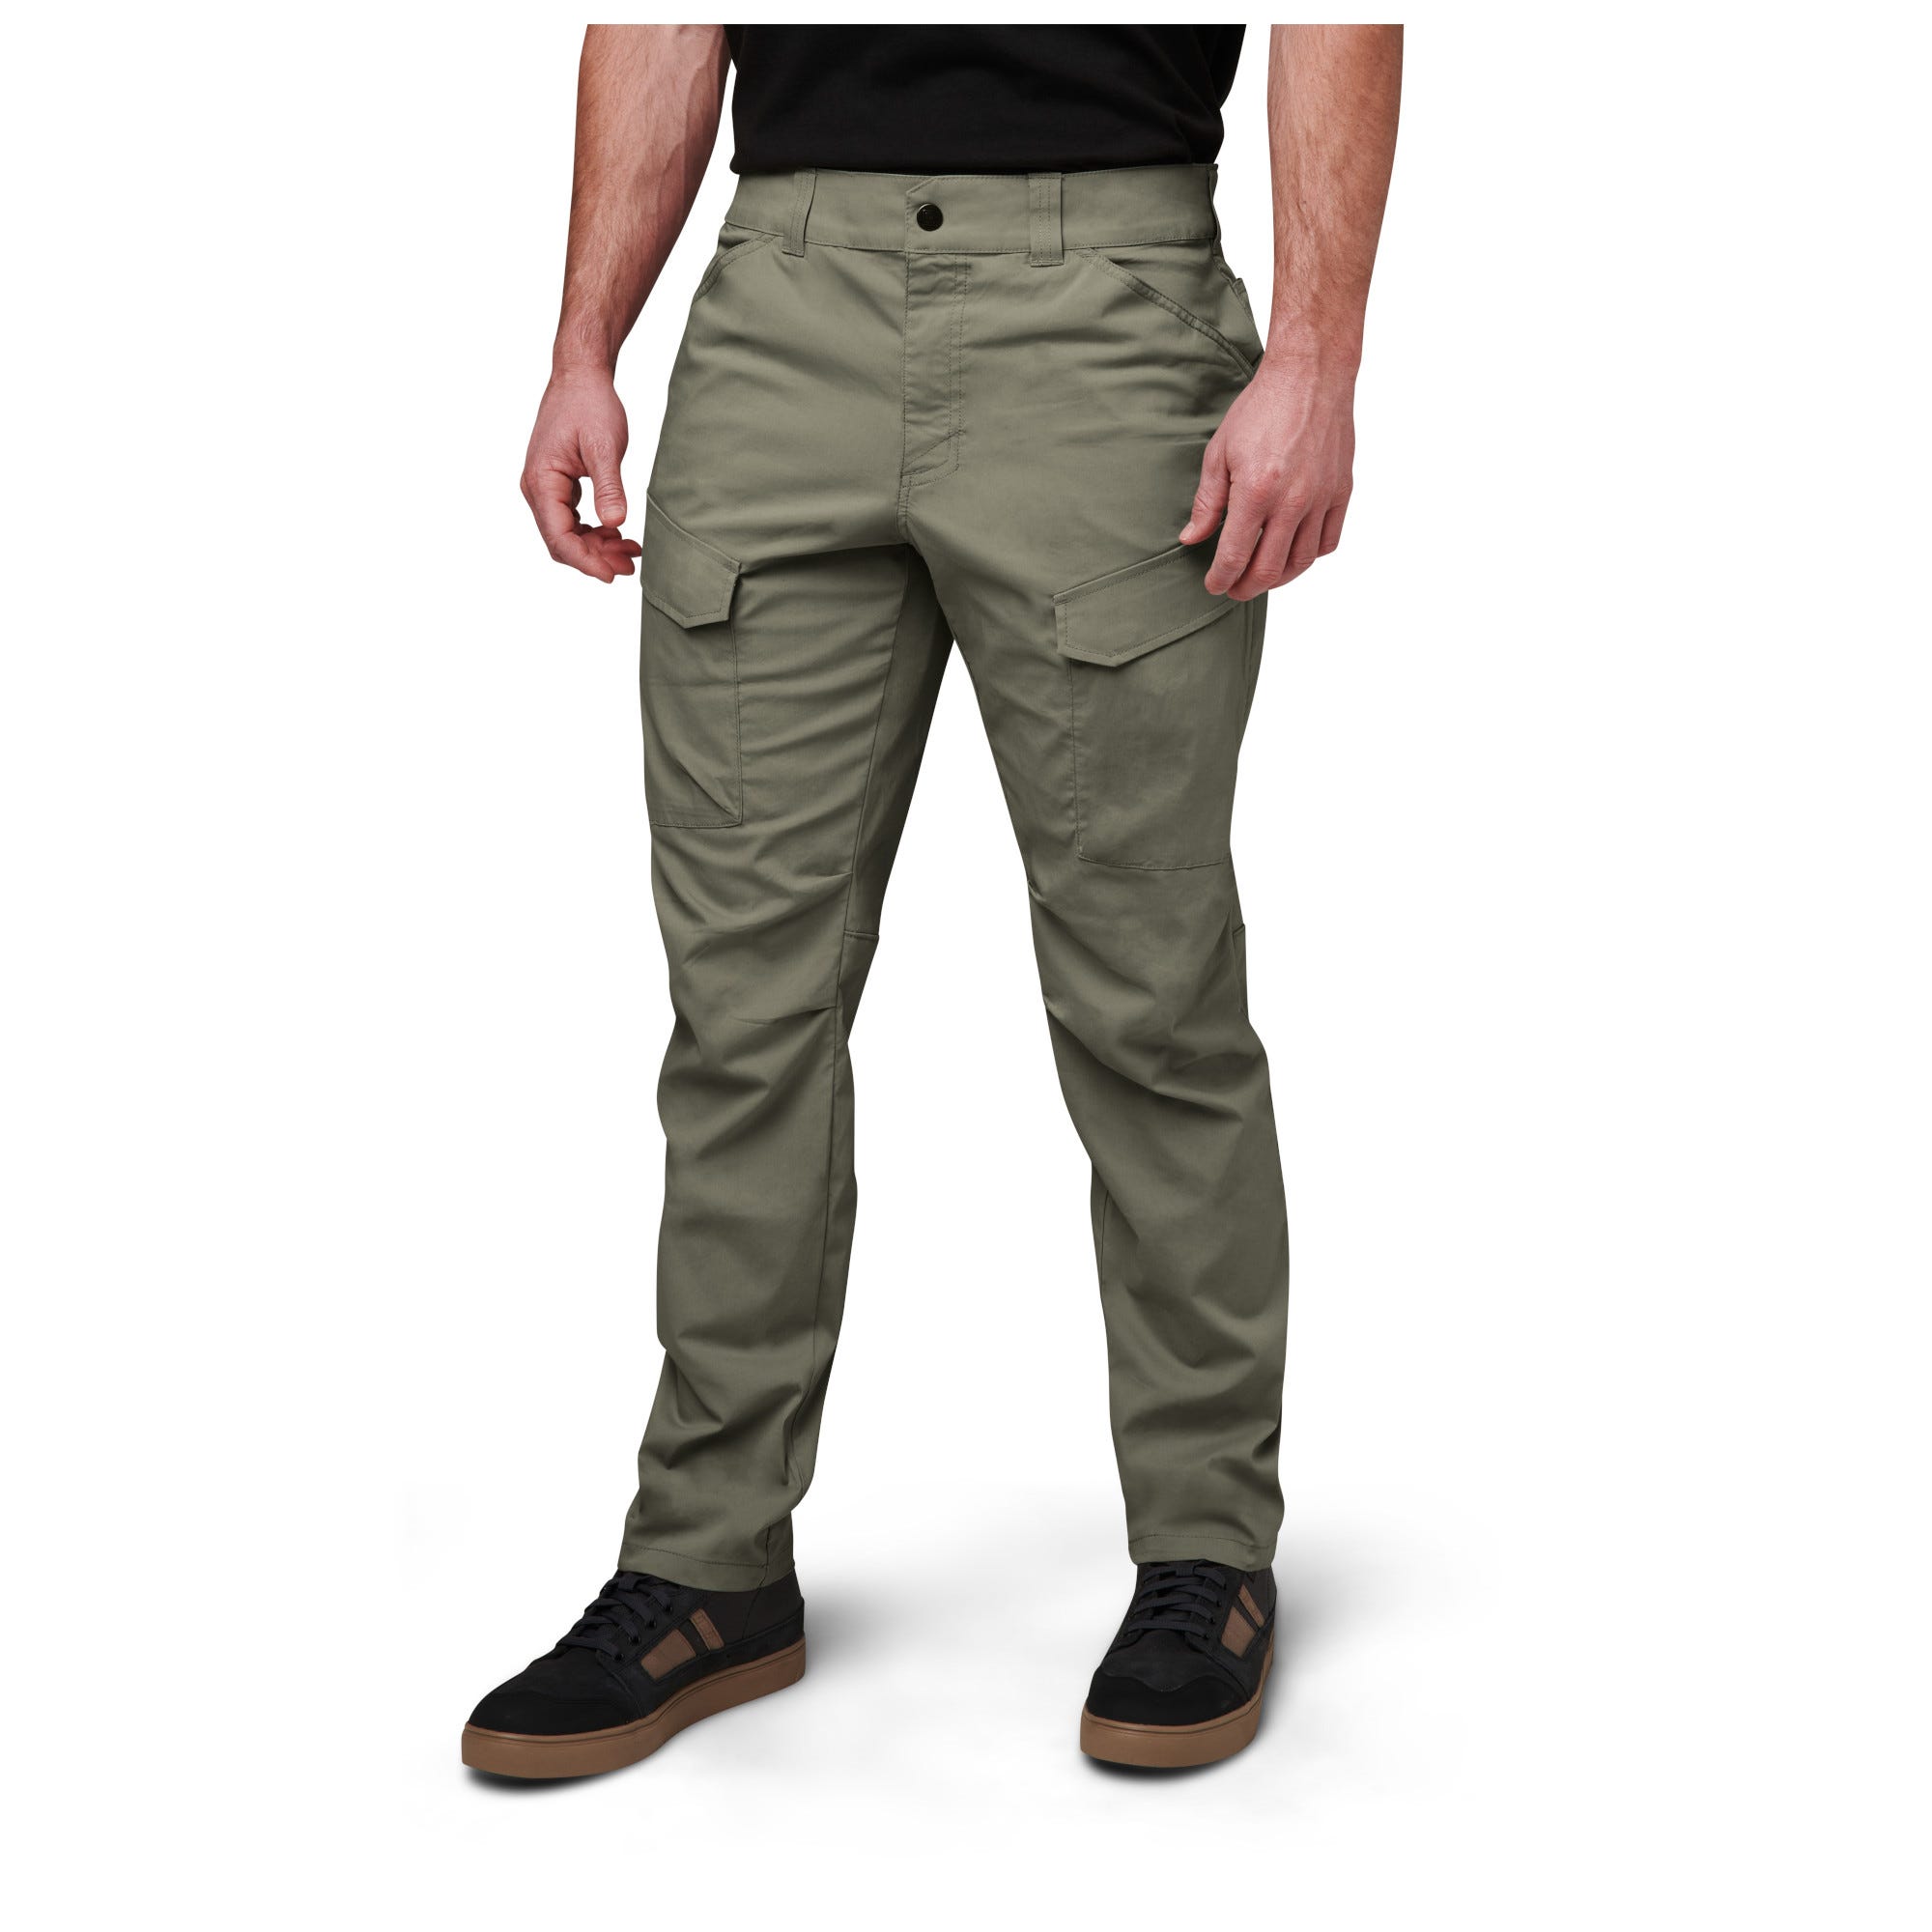 Tactical pants women: Stylish and Functional Apparel插图4